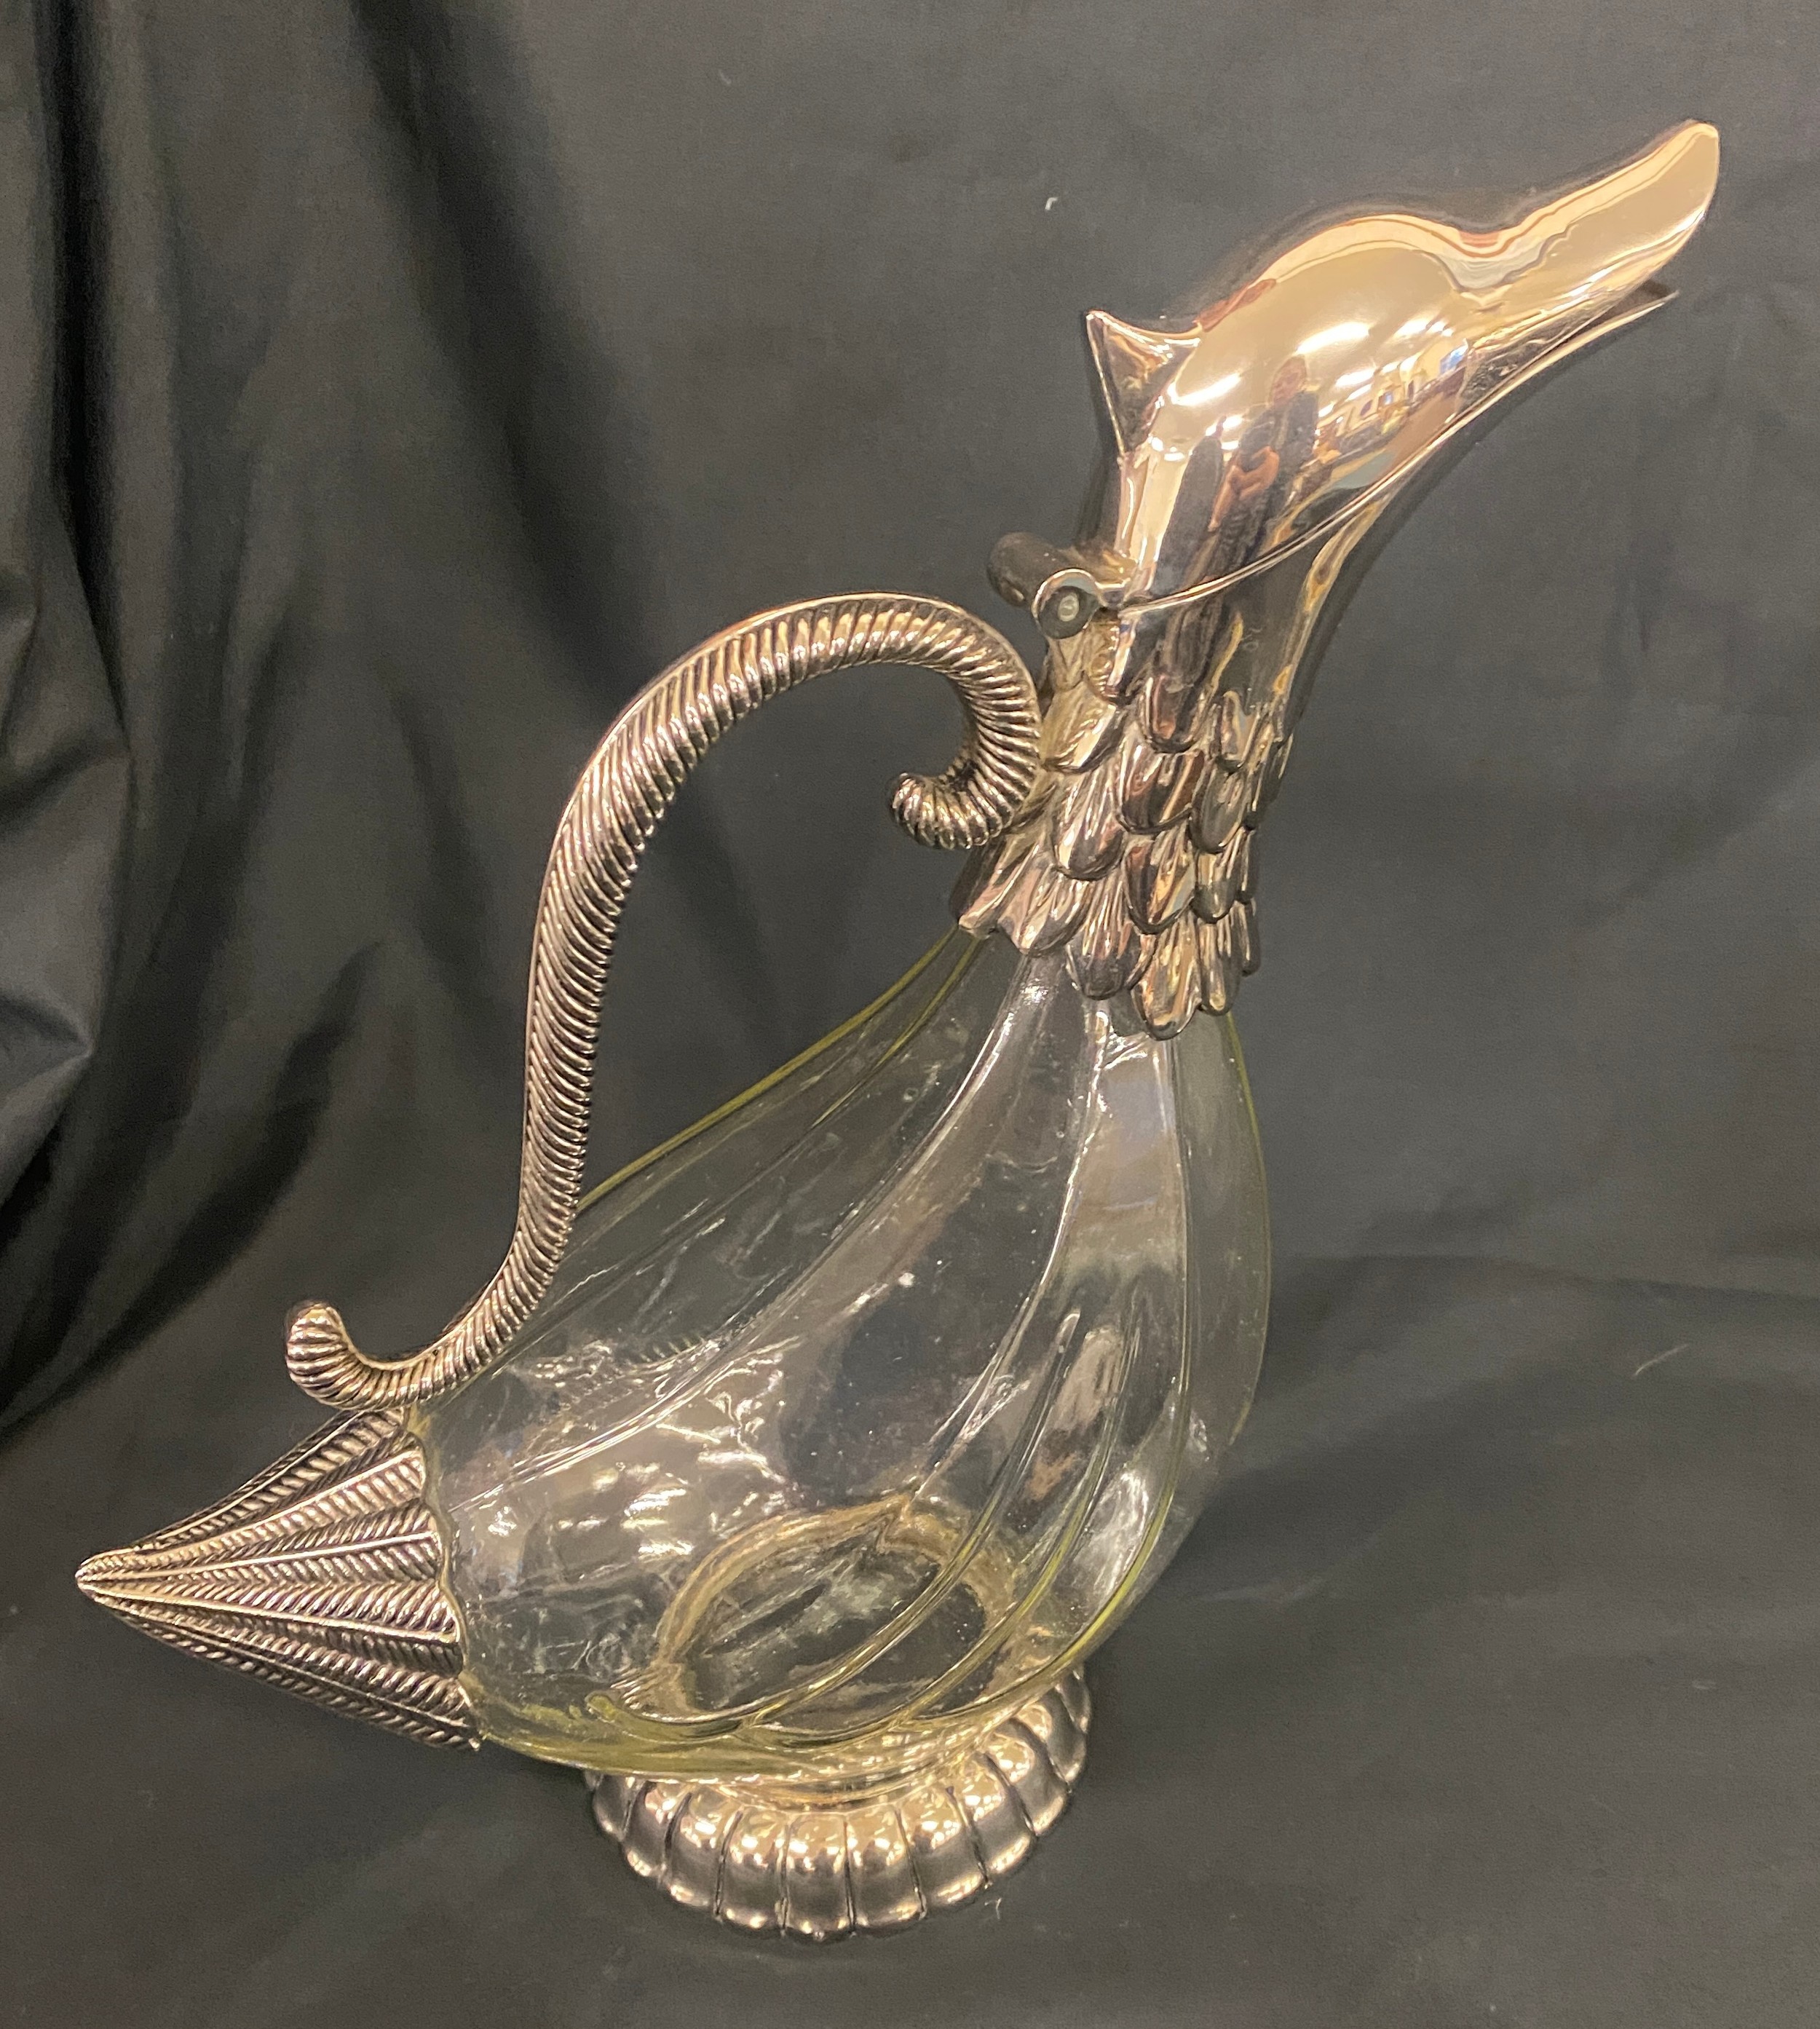 A near pair of glass duck wine decanters with white metal handles and heads - Image 2 of 7